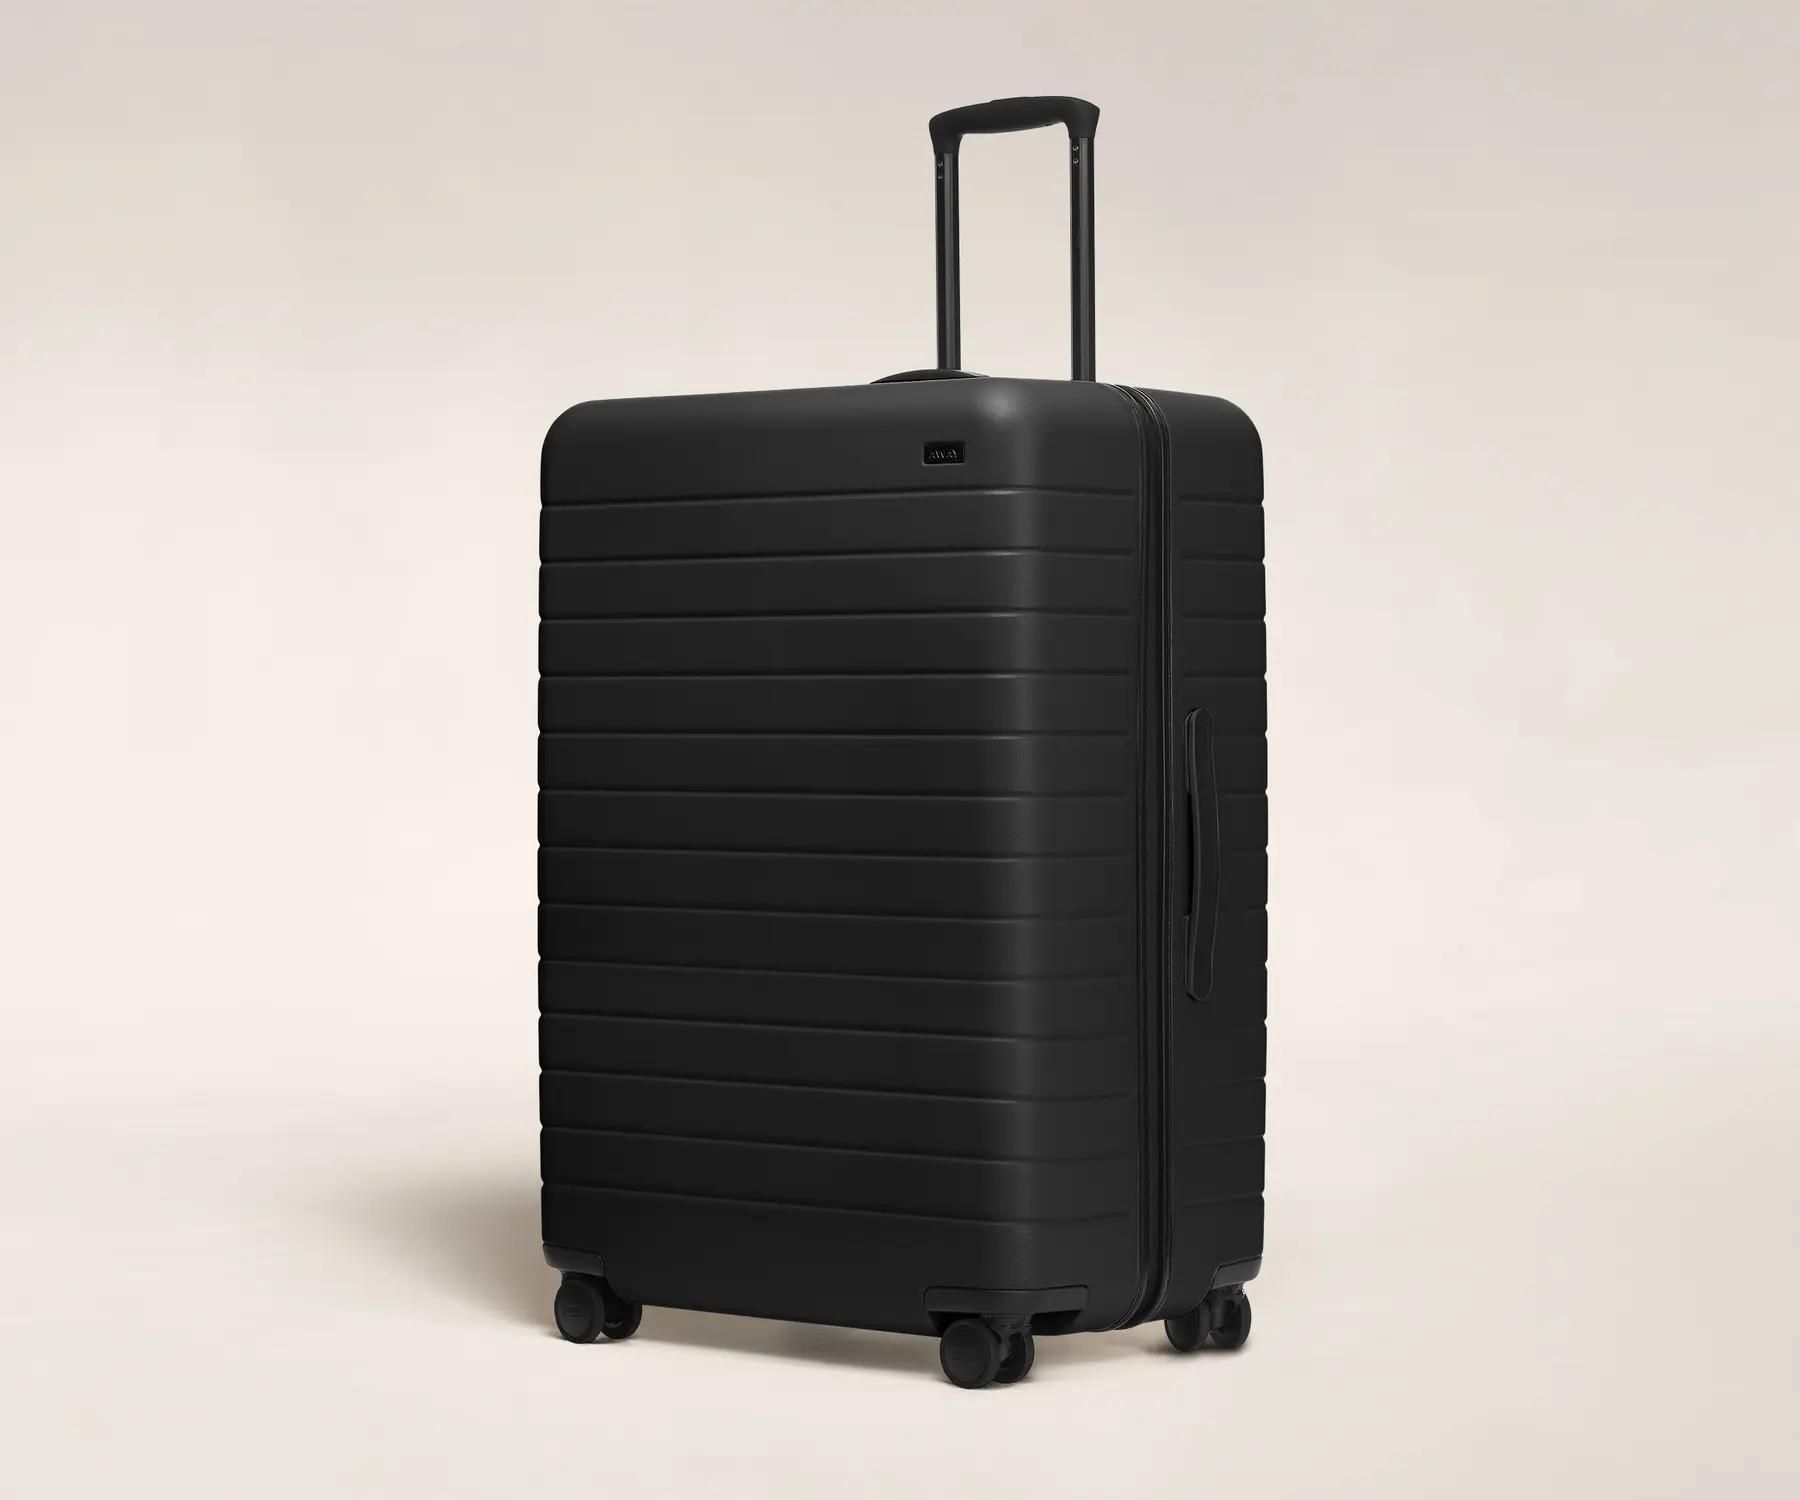 <p><strong>$375.00</strong></p><p>Away's modern case is lightweight, durable, and rolls smooth as silk. From its 360 degree wheels to 2+ weeks packing capacity, this guy is going to get you through your travels, thick and thin.</p>